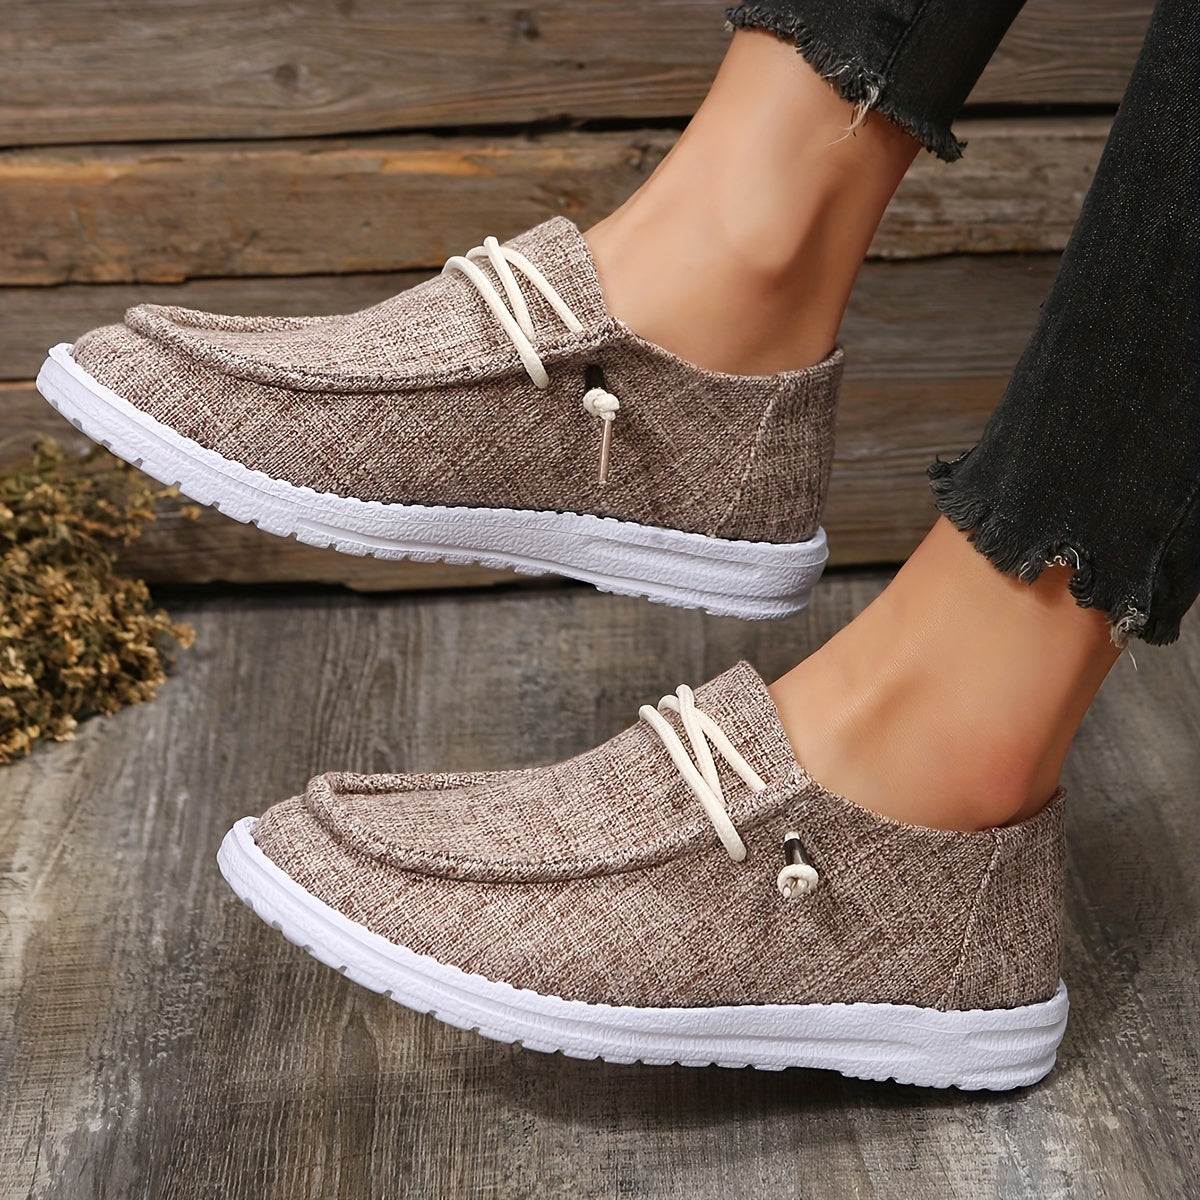 Women's Solid Color Flat Shoes, Slip On Low-top Round Toe Lightweight Canvas Shoes, Casual Outdoor Sporty Shoes